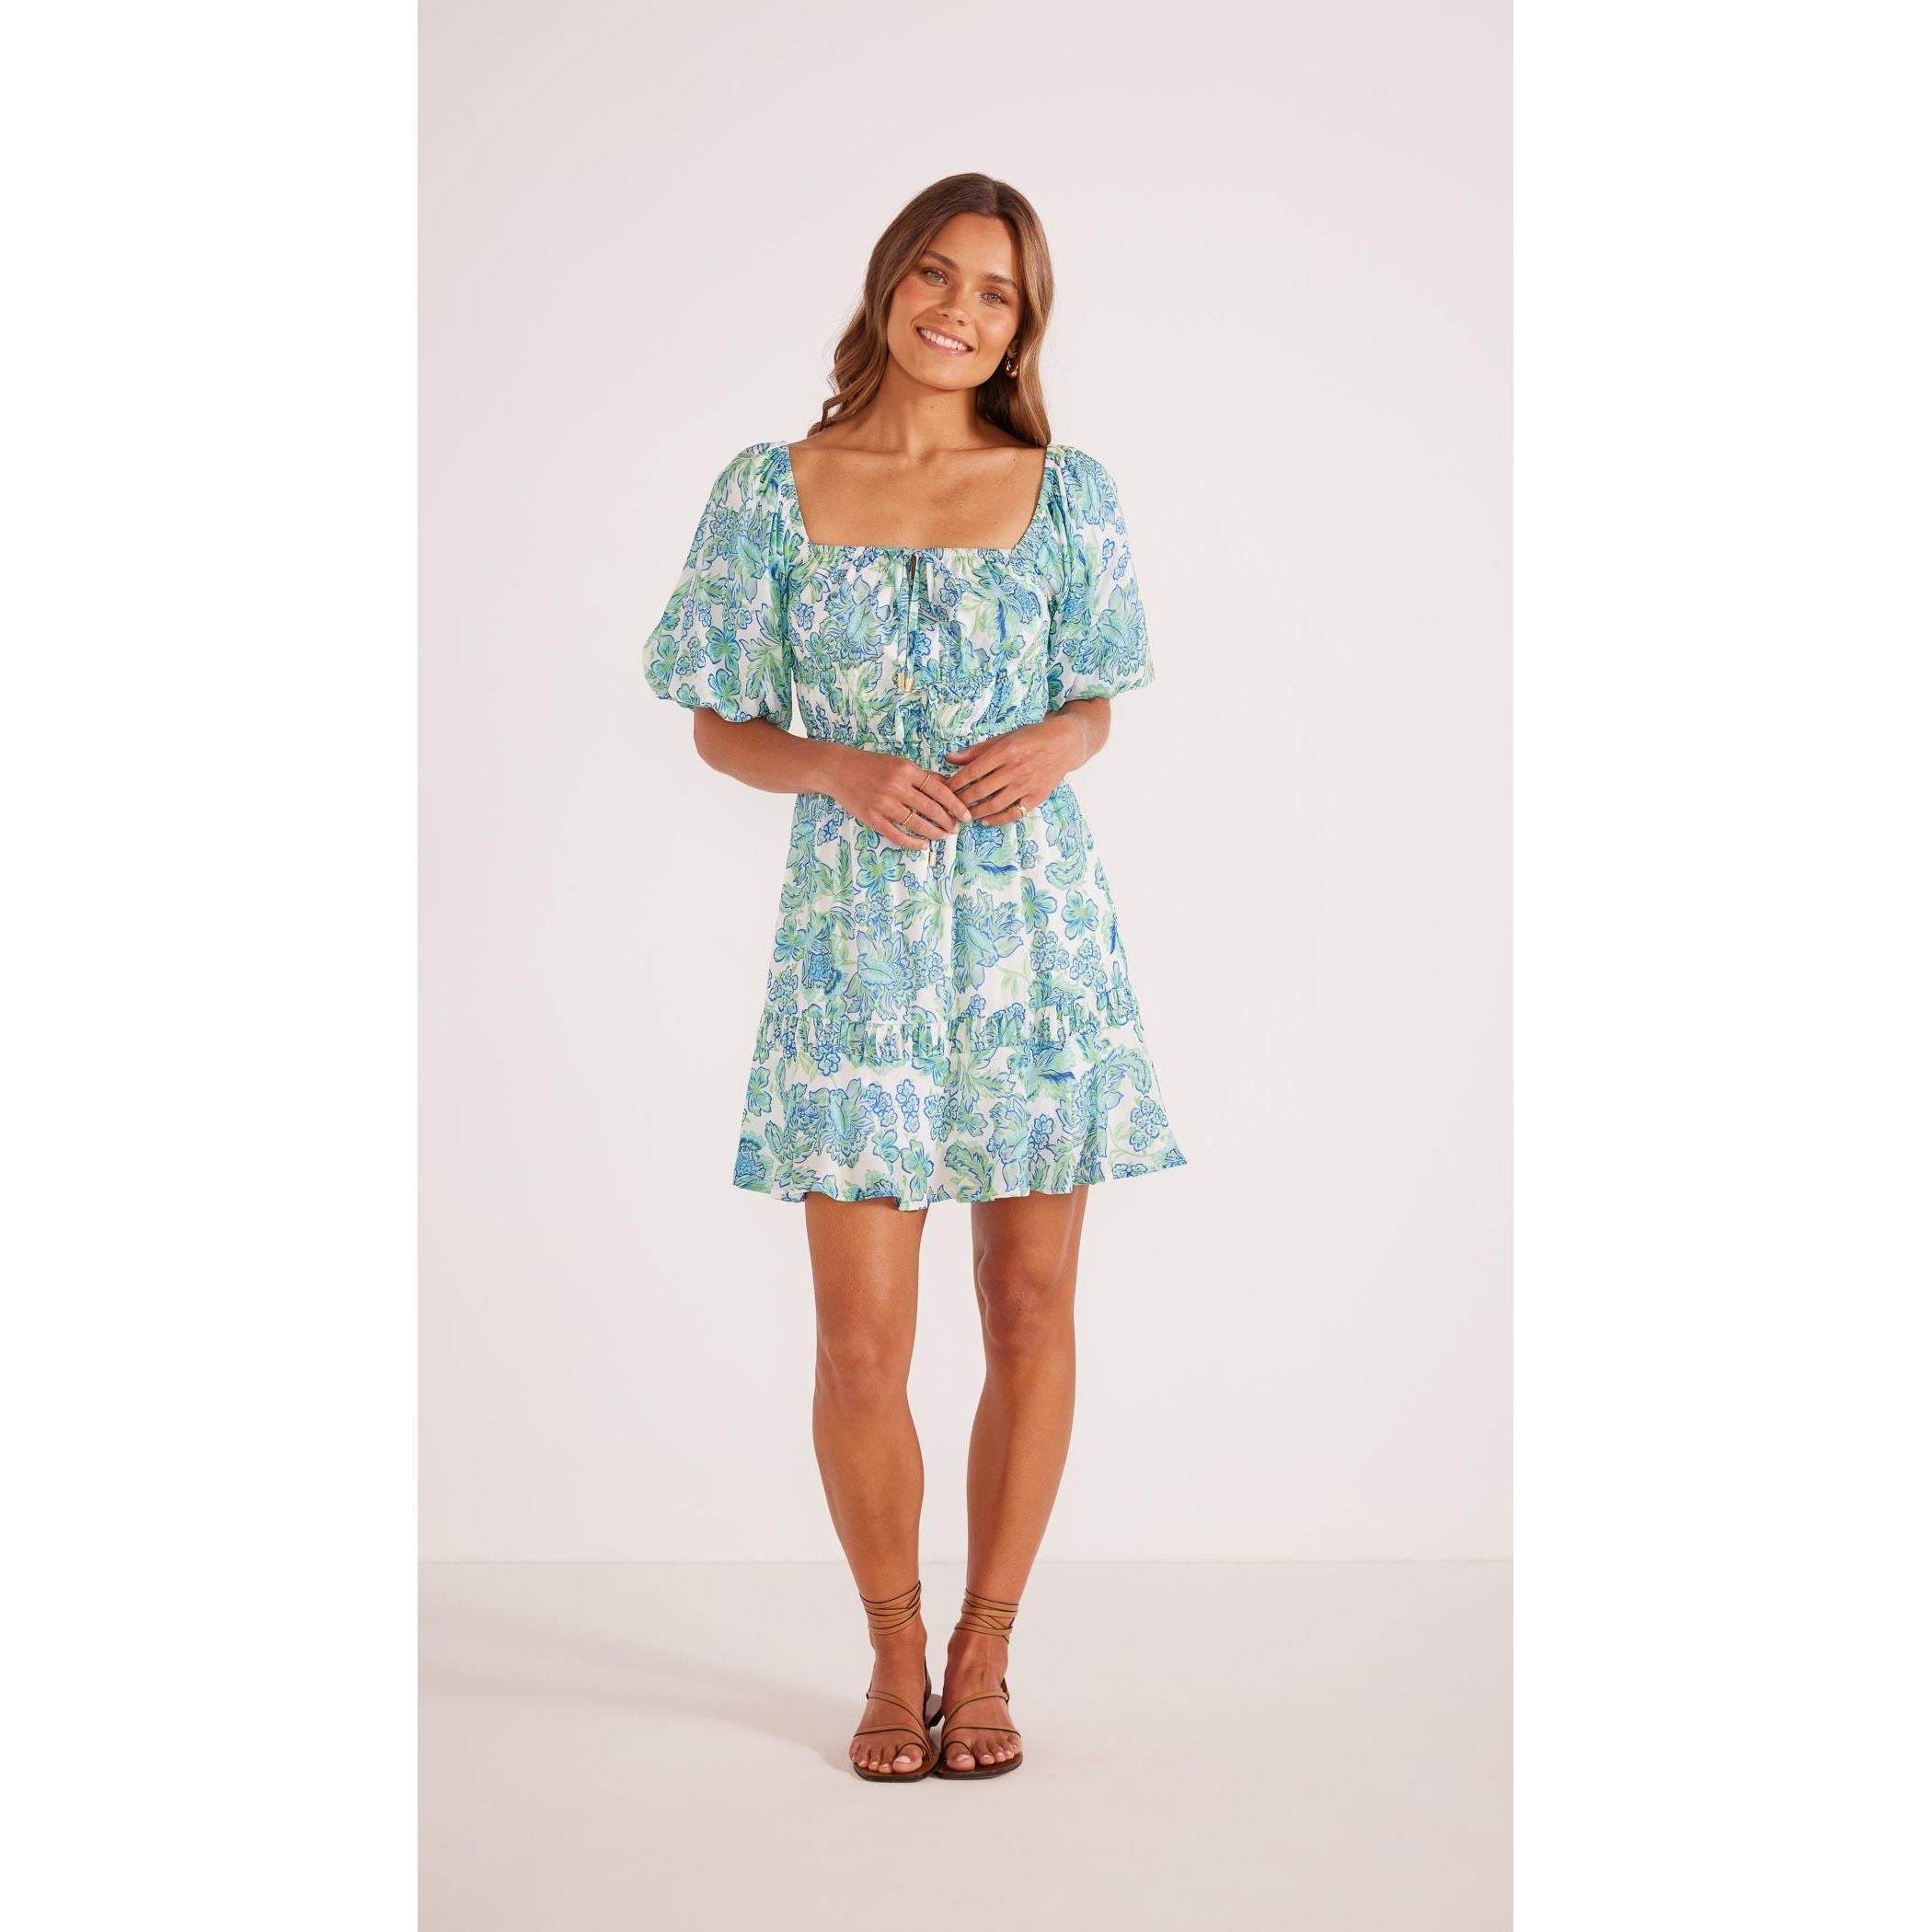 Mink Pink - Alessia Puffed Sleeve Dress in Blue Green Floral